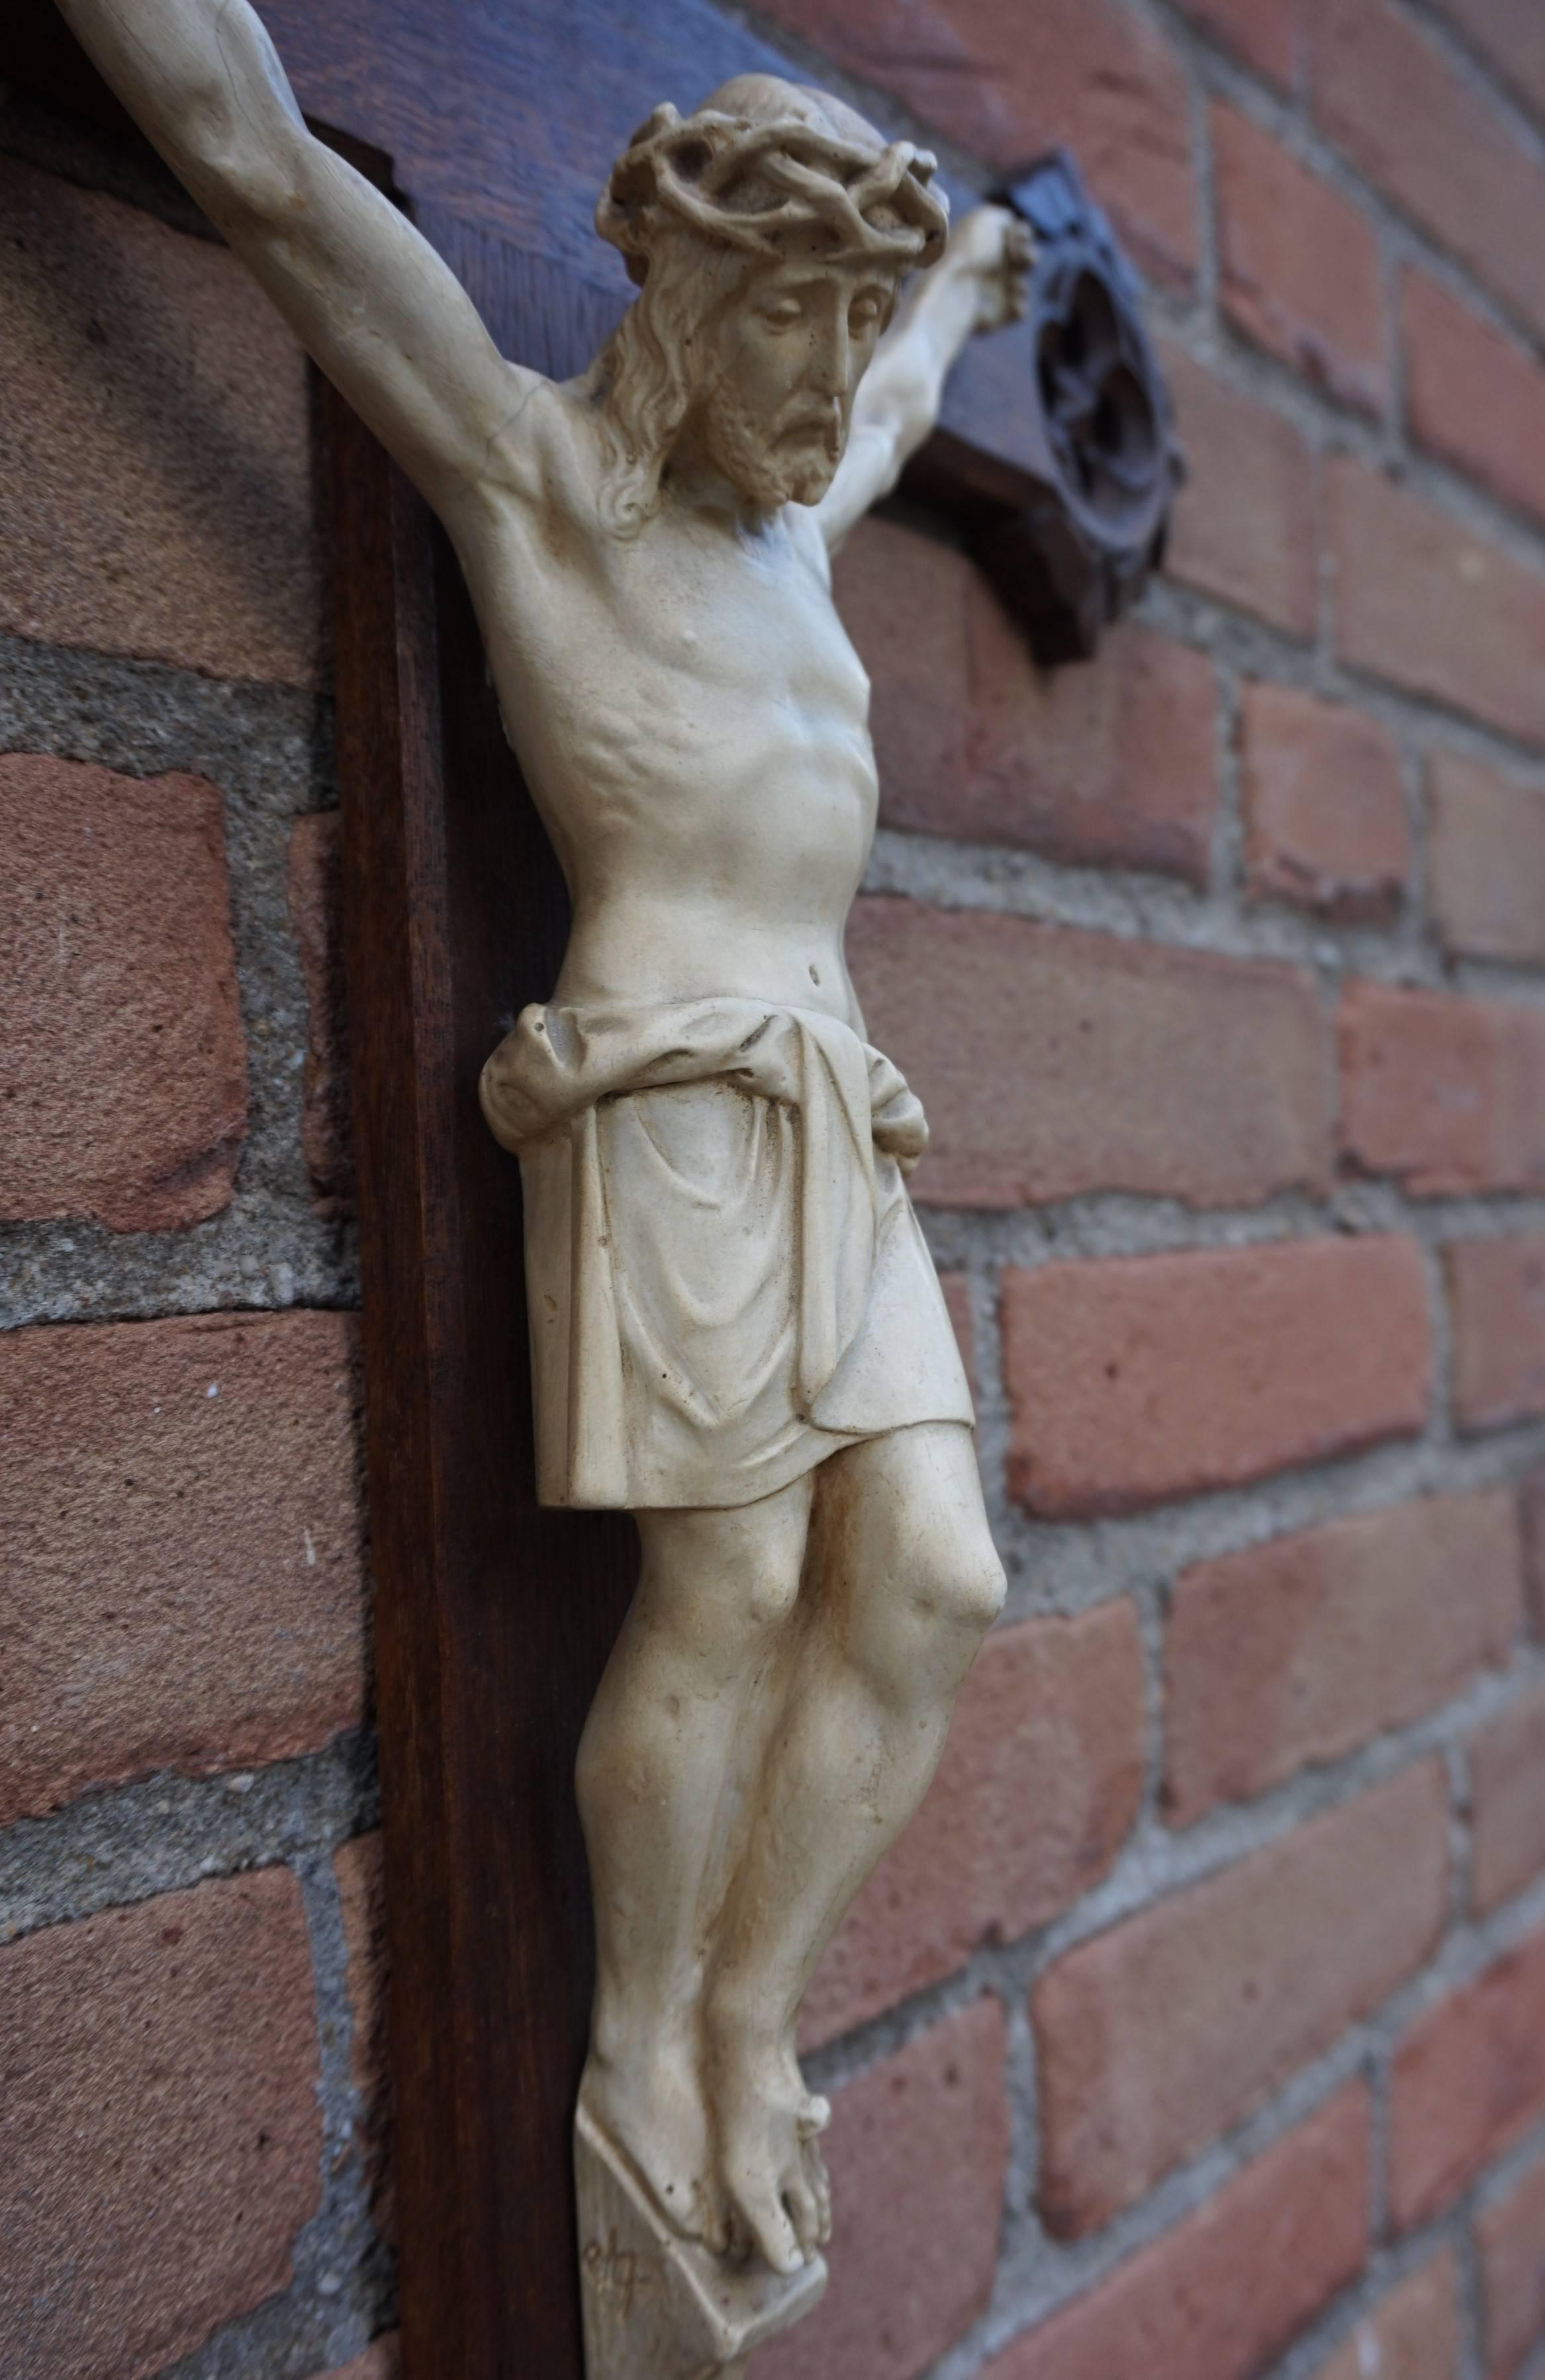 Hand-Carved Early 20th Century Gothic Revival Crucifix with White Clay Corpus of Christ 1910